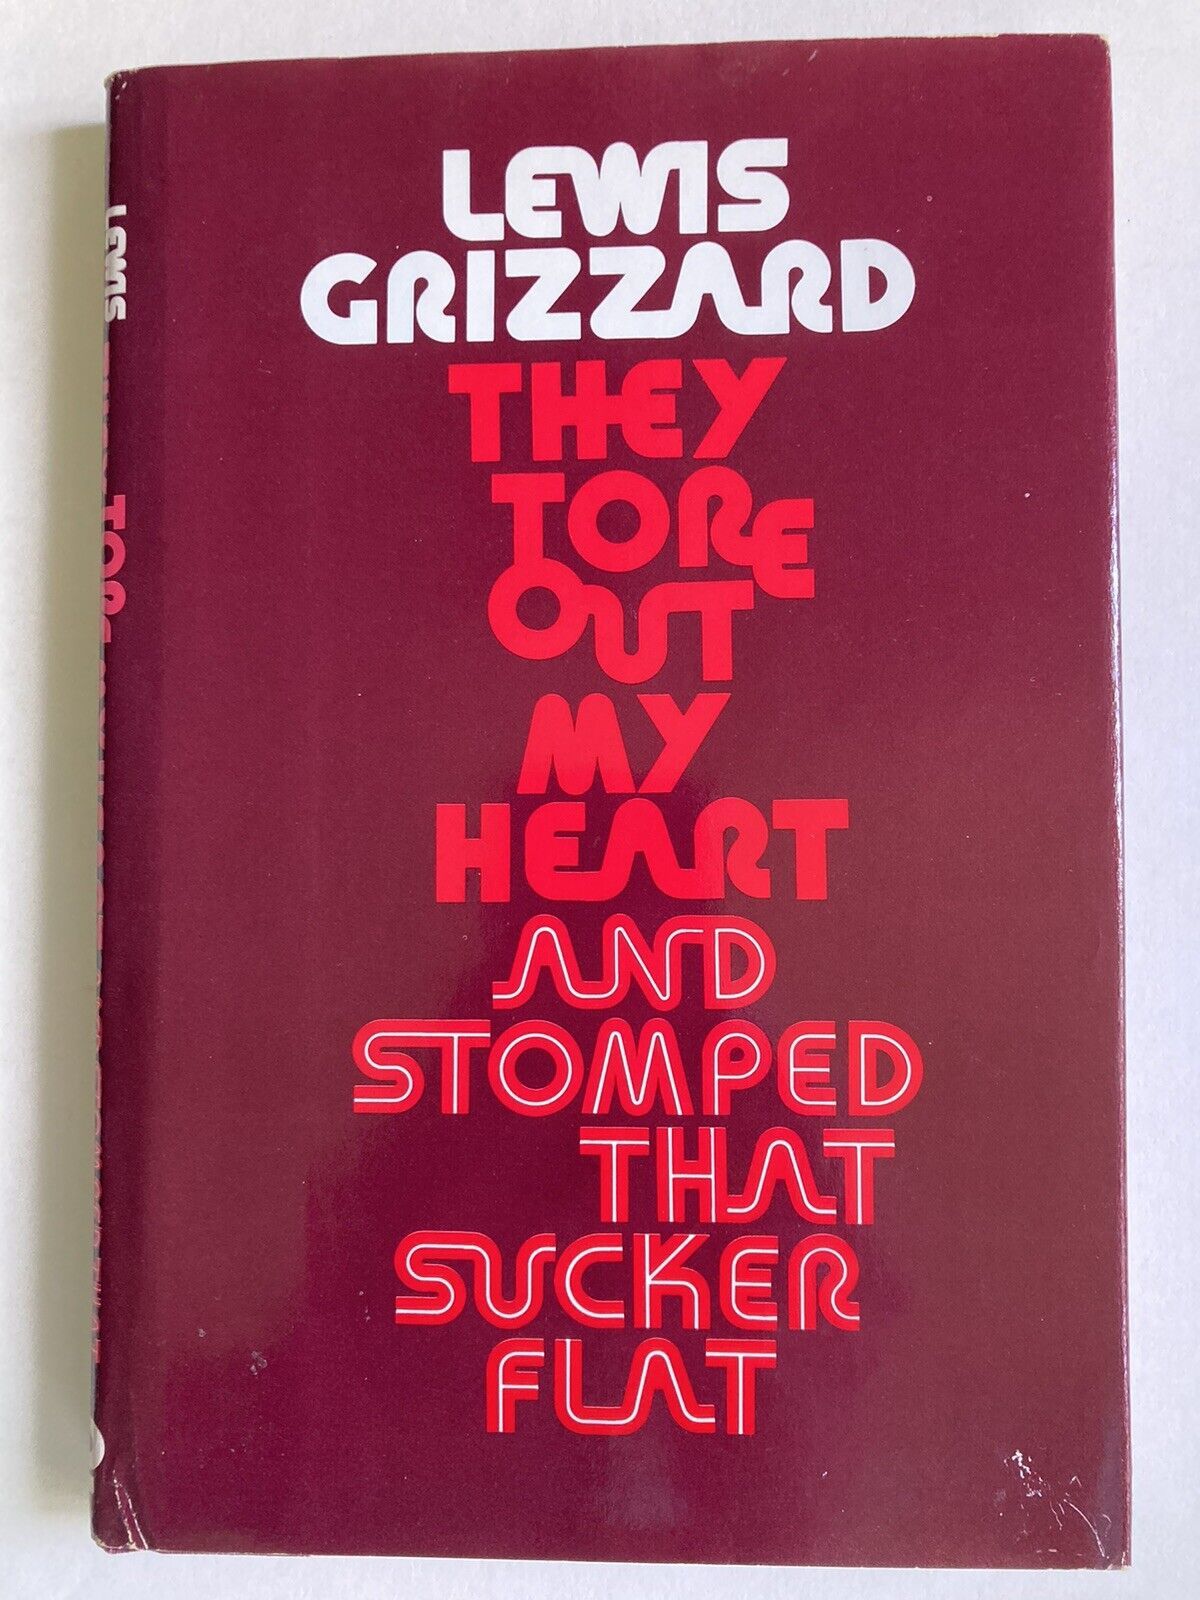 (SIGNED) They Tore Out My Heart and Stomped That Sucker Flat - Lewis Grizzard